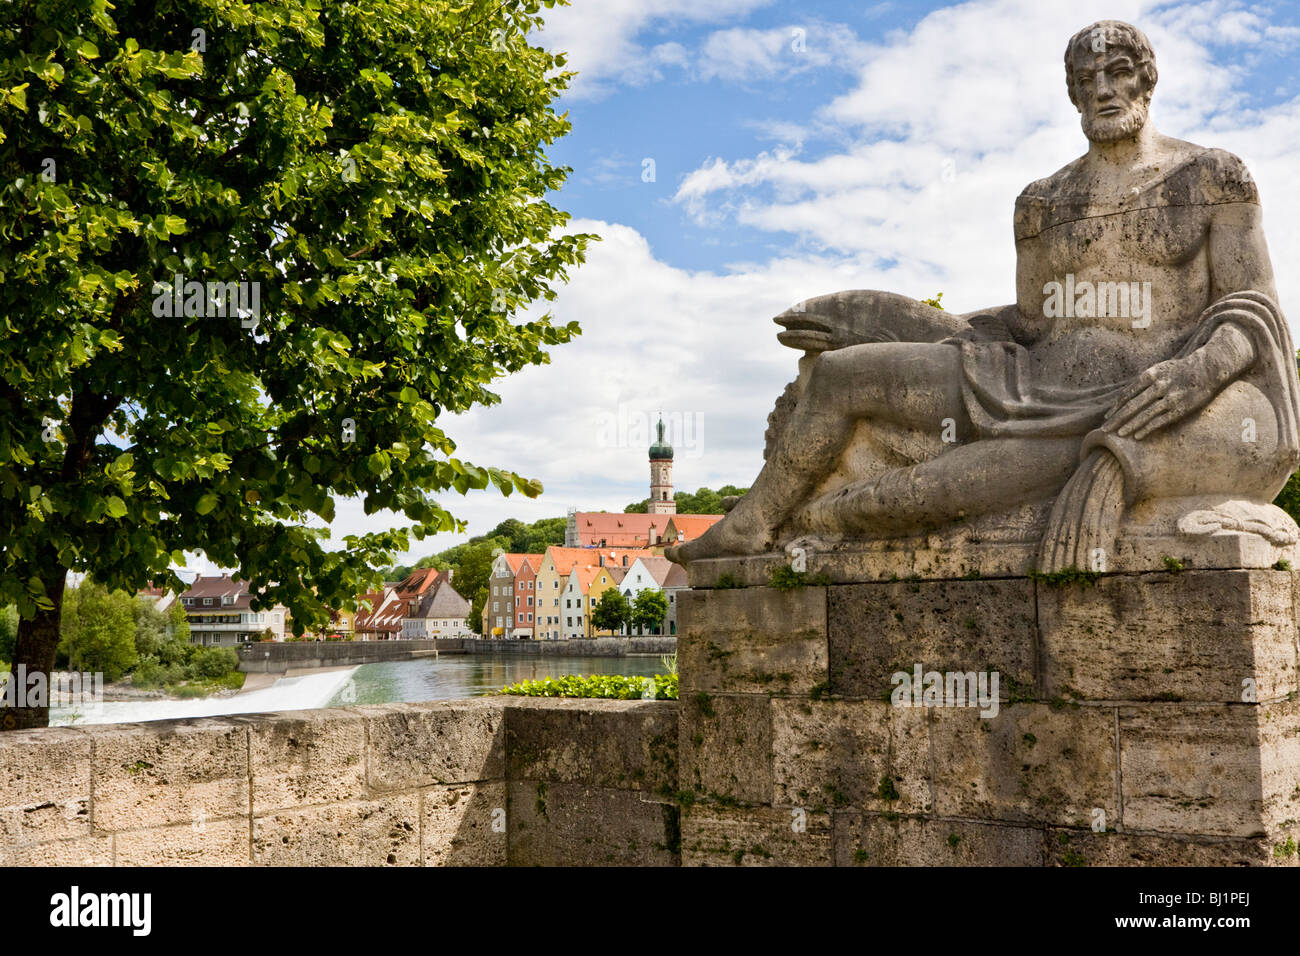 Sculpture with river and townscape, Landsberg am Lech, Bavaria, Germany Stock Photo